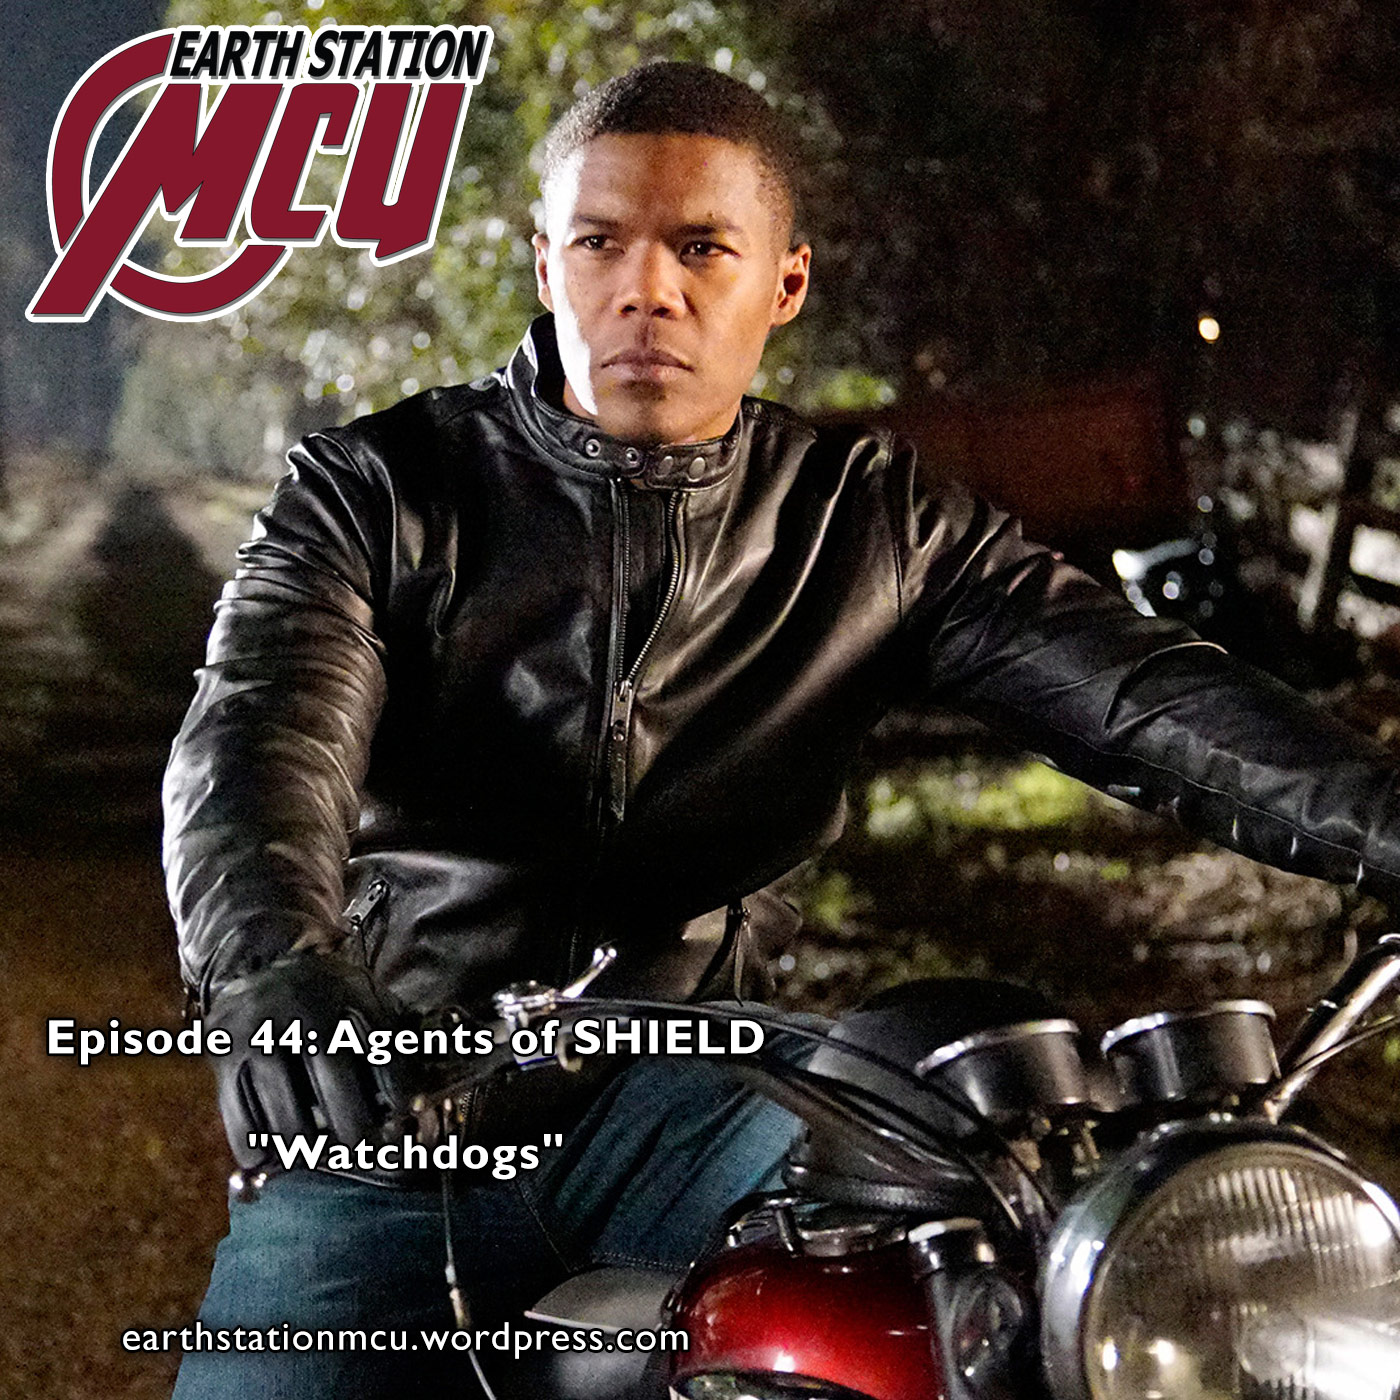 Earth Station MCU: Episode 44 - Agents of SHIELD ”Watchdogs” and ”Spacetime”